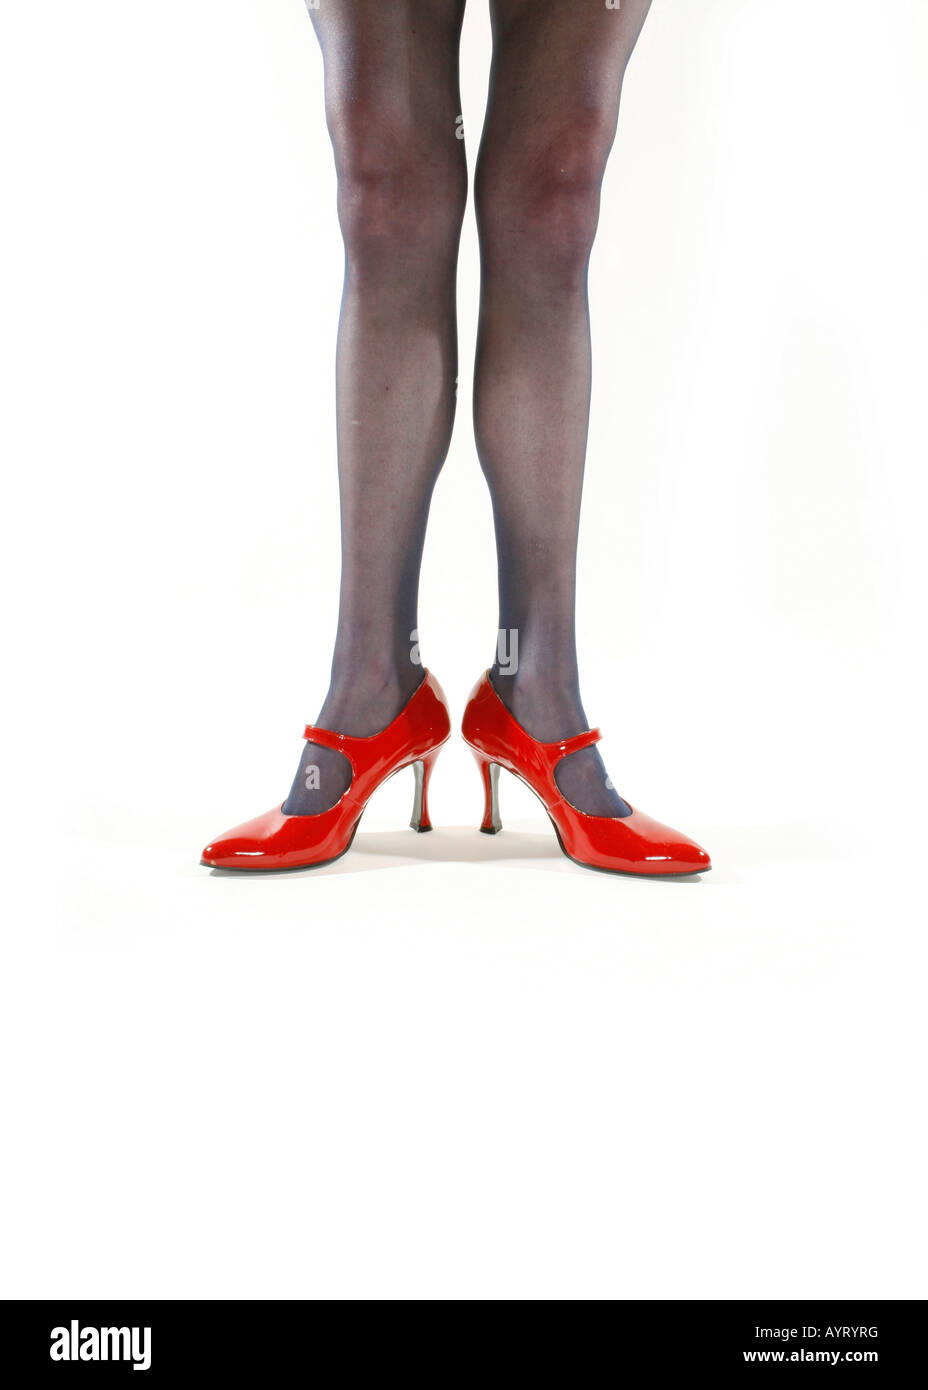 Womans legs in red high heels Stock Photo